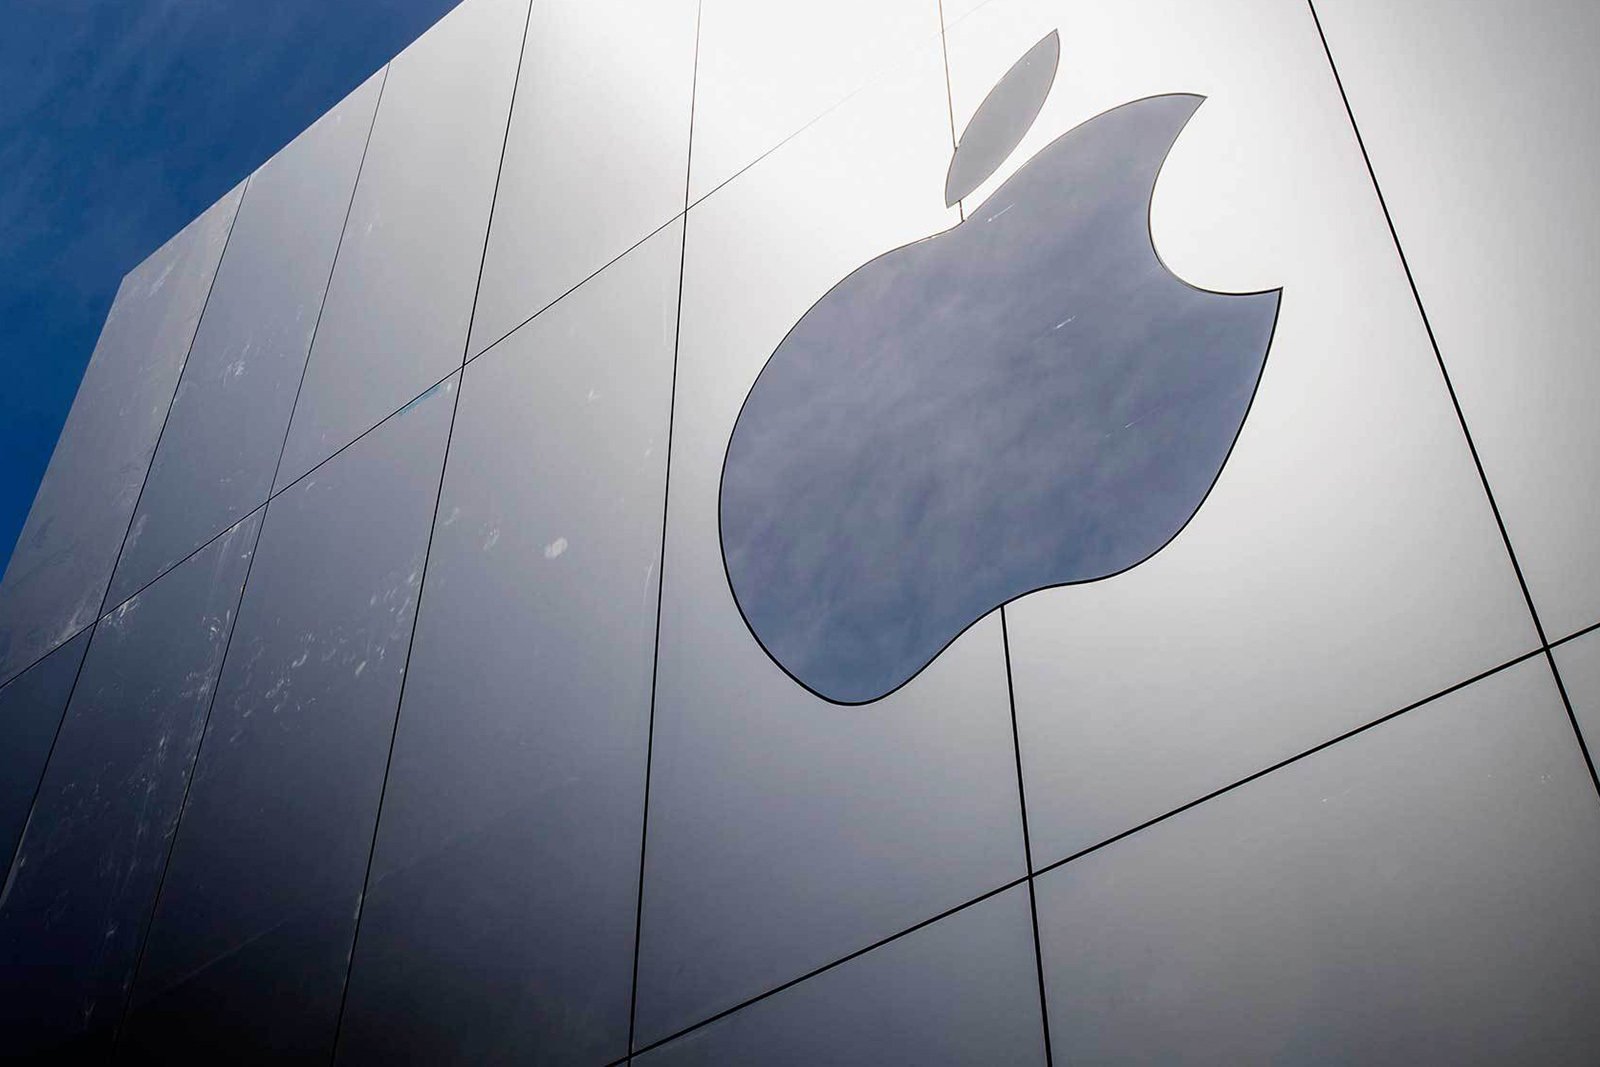 The Apple Inc. logo is seen on the facade of the new Apple Inc. flagship store at Union Square in San Francisco, California.
